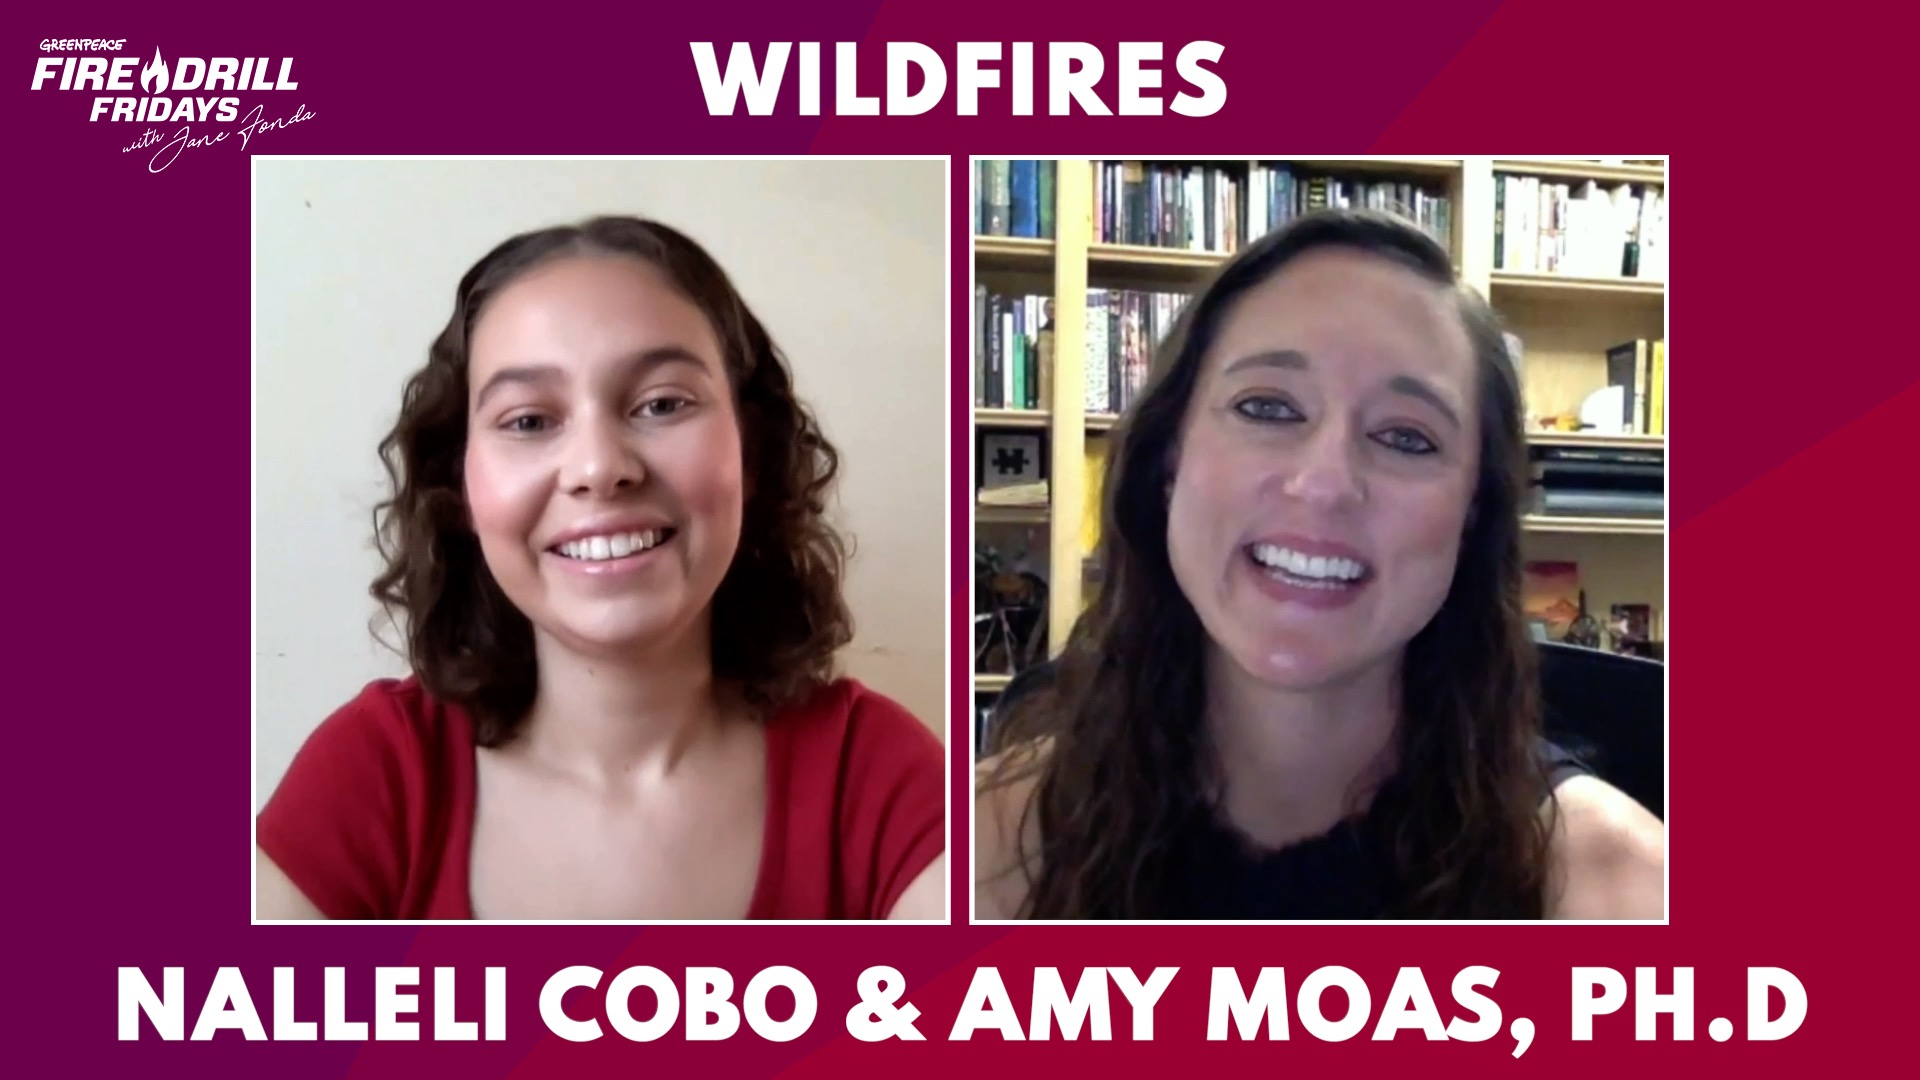 Watch Fire Drill Friday with Guest-Host Nalleli Cobo & Amy Moas, Ph.D